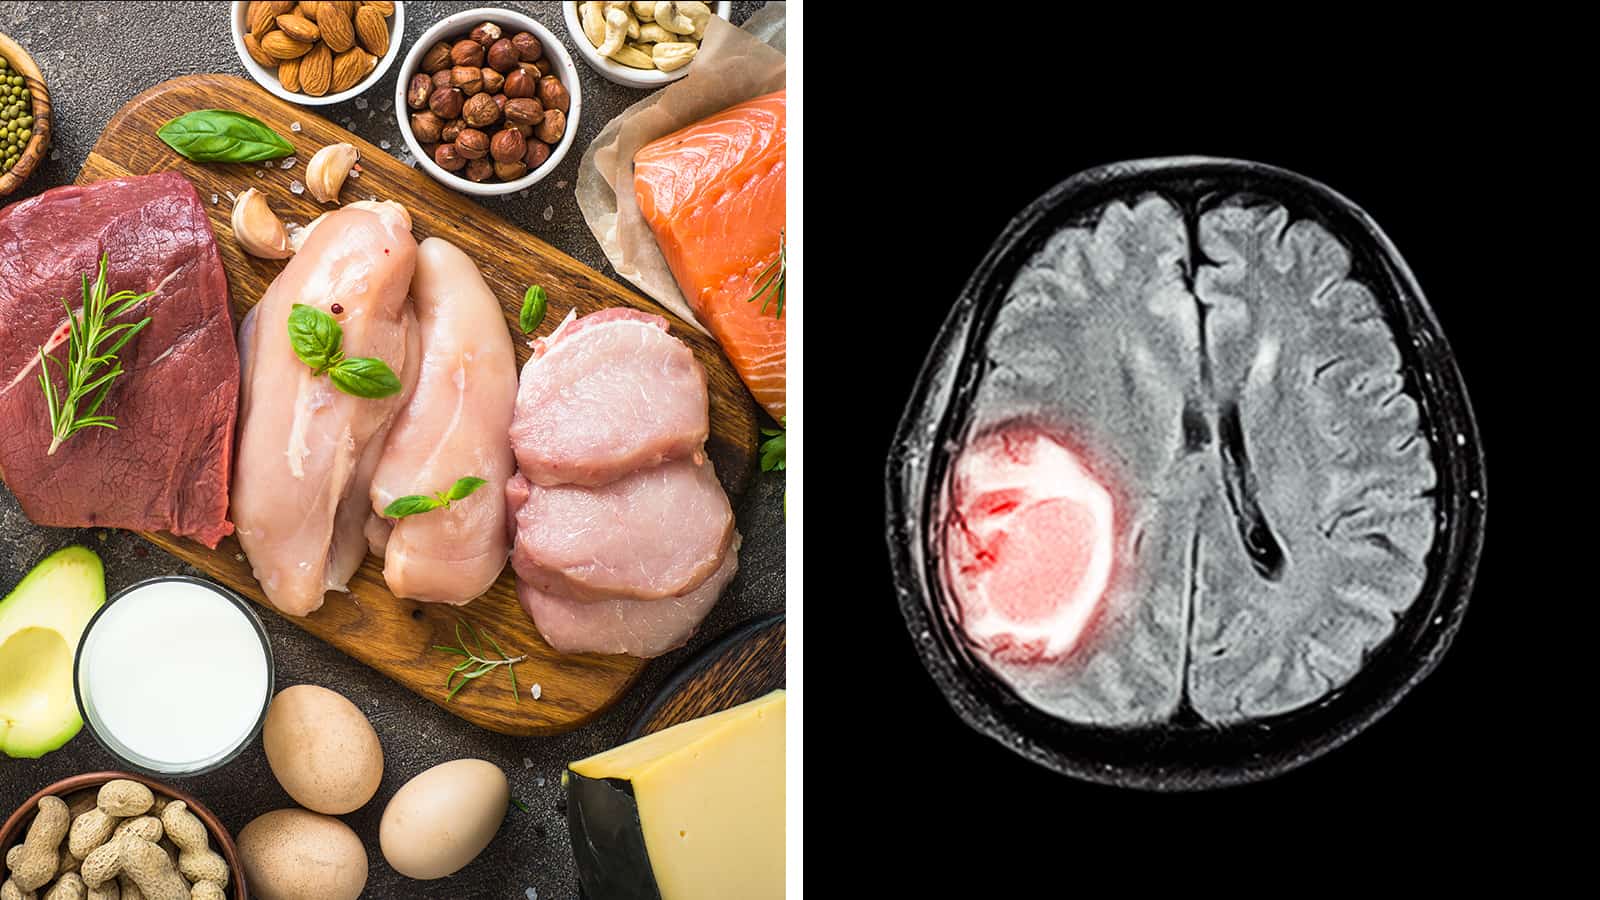 Neurologists Find a Link Between the Keto Diet and Brain Tumor Growth